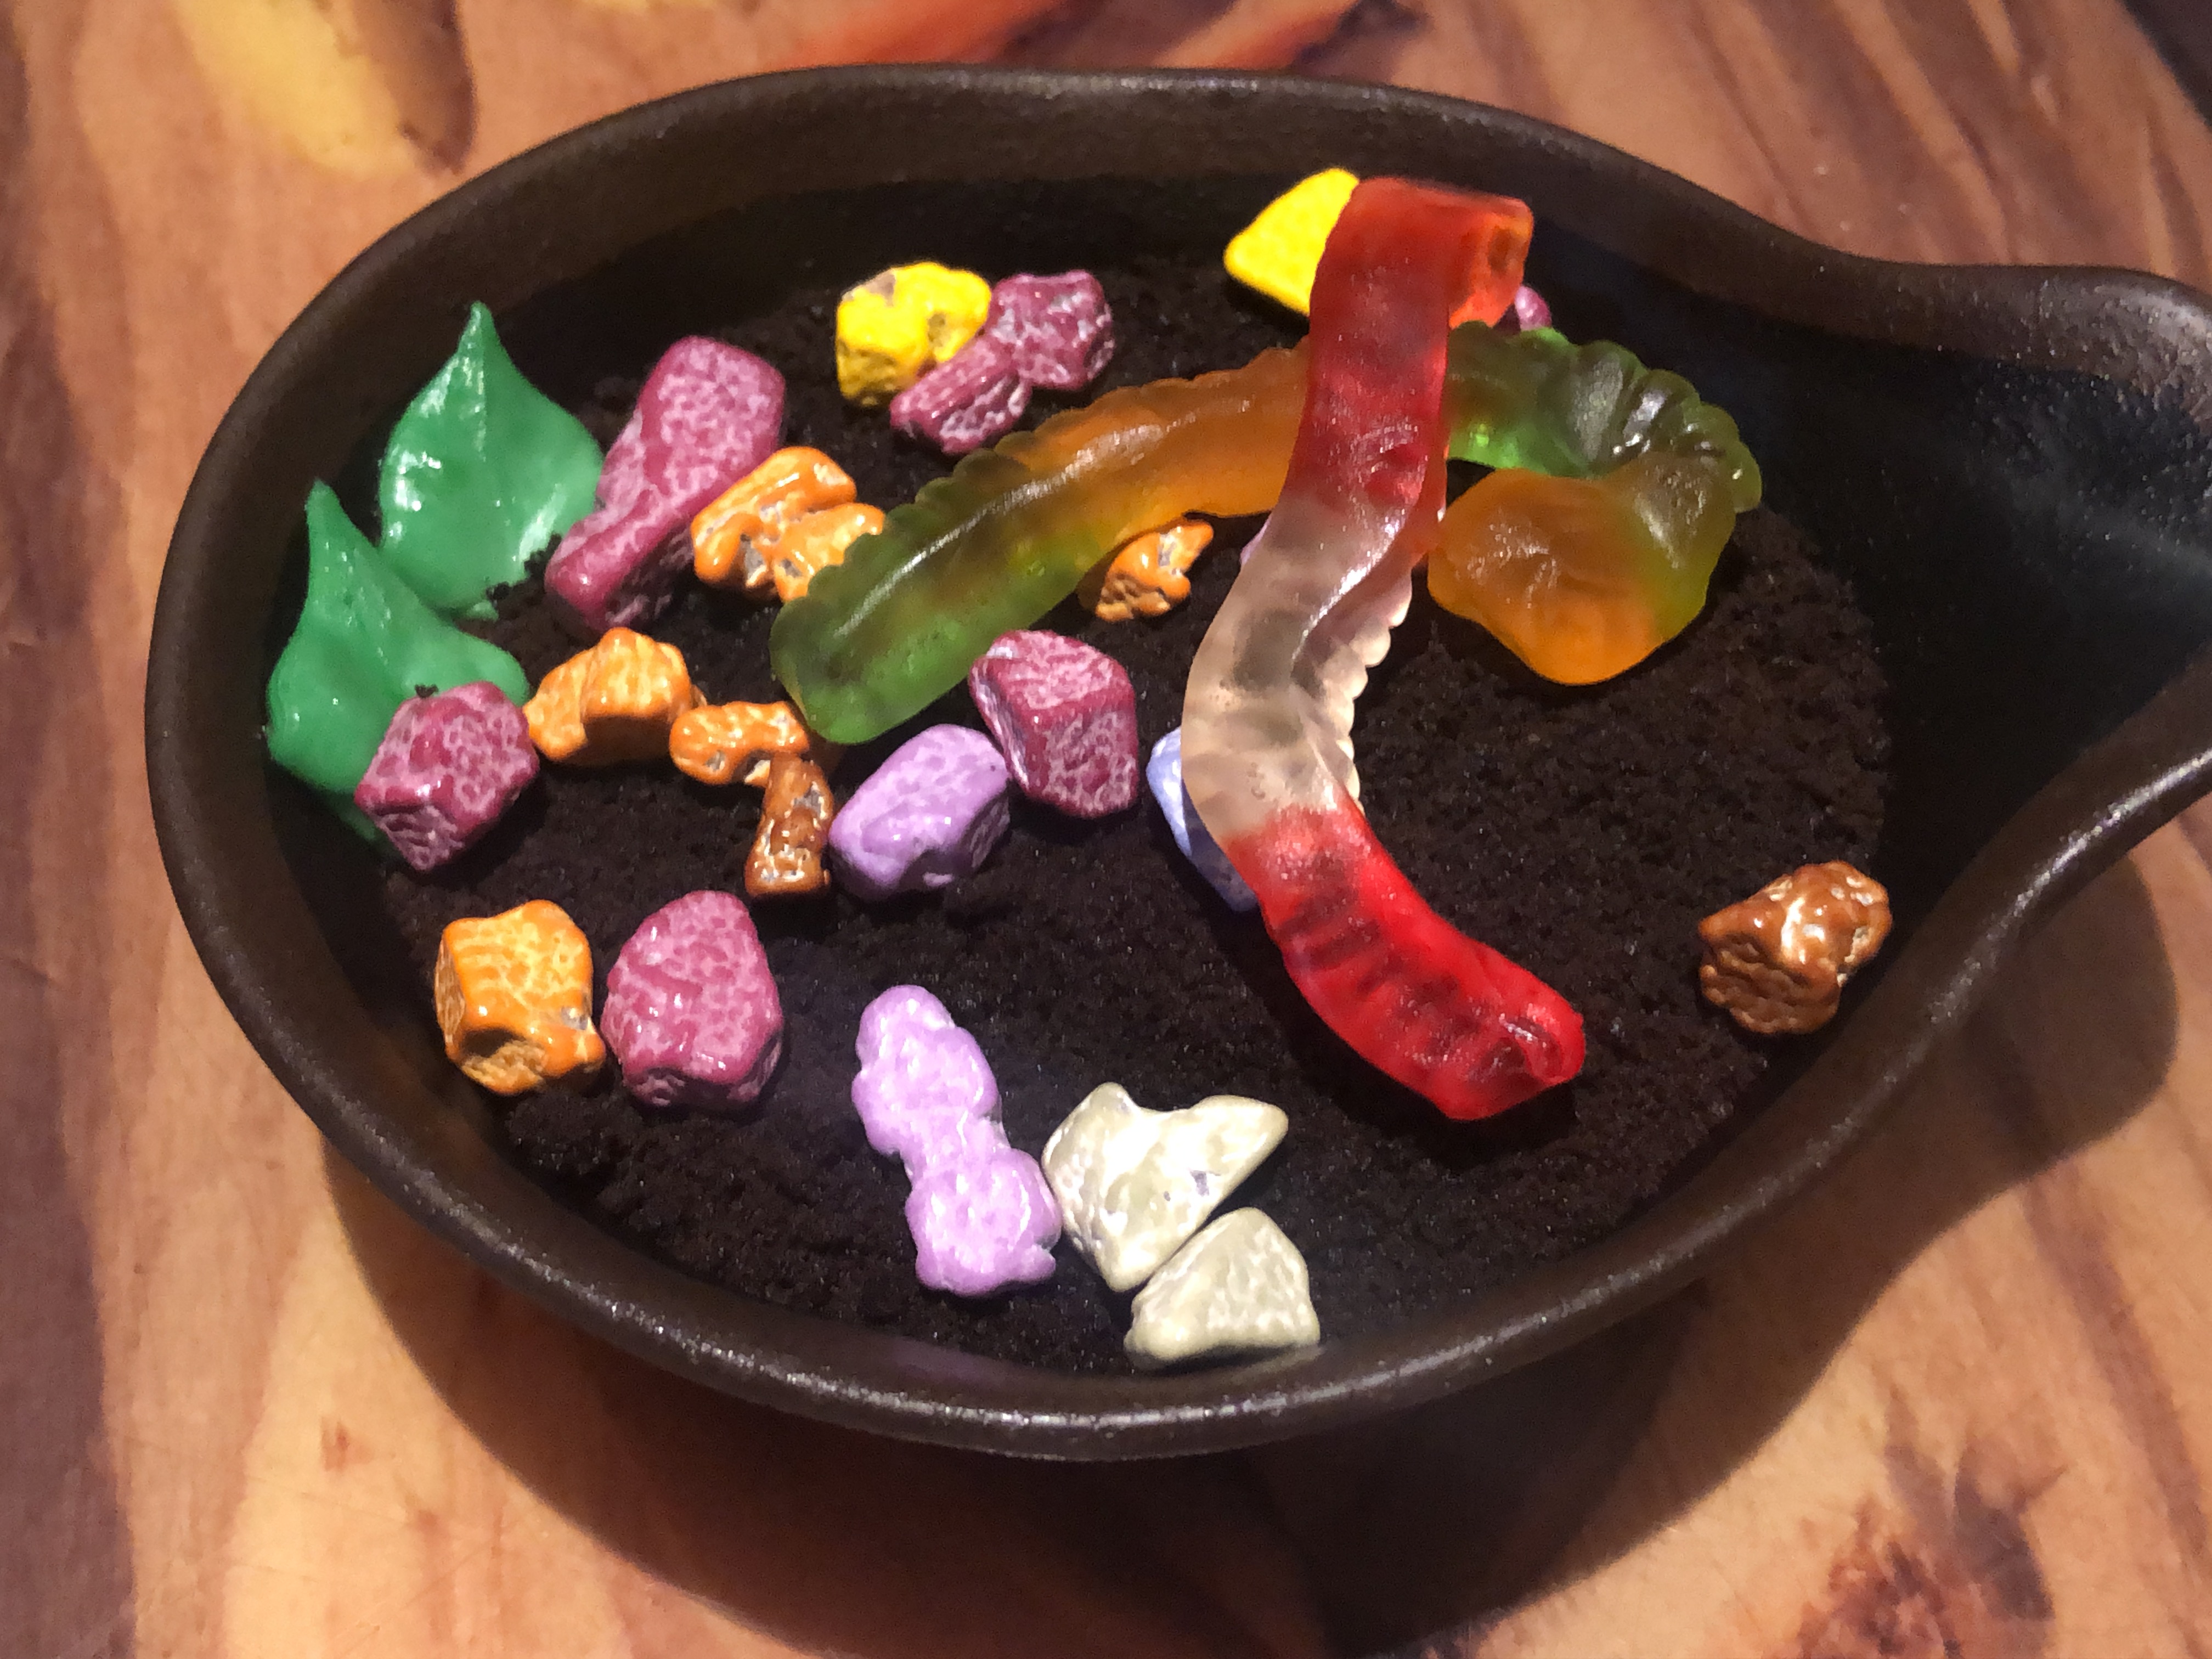 chocolate rocks, gummi worms,and  frosting leaves on a dessert covered in a bed of crushed chocolate cookies